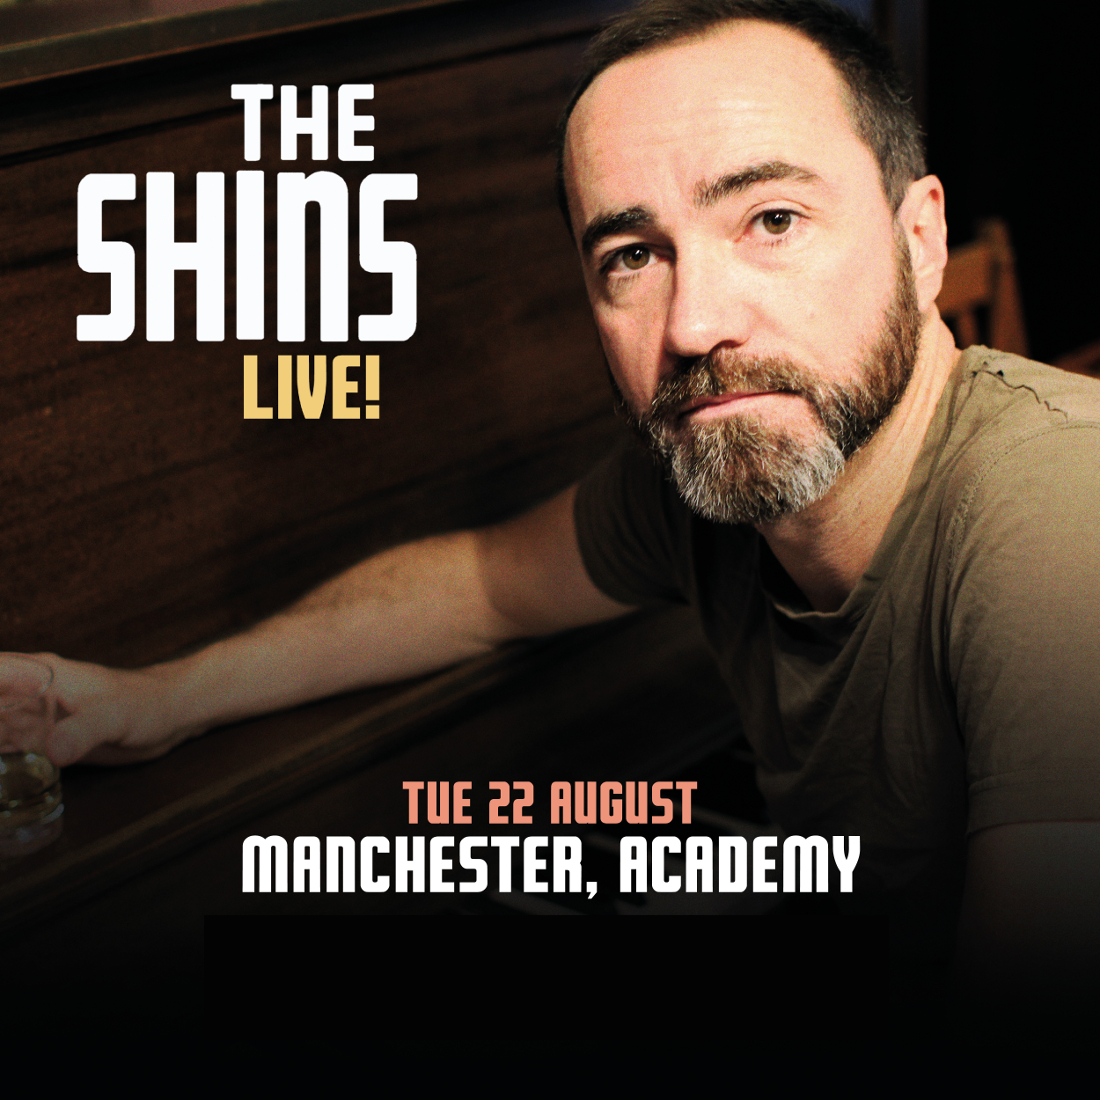 Buy The Shins tickets, The Shins tour details, The Shins reviews